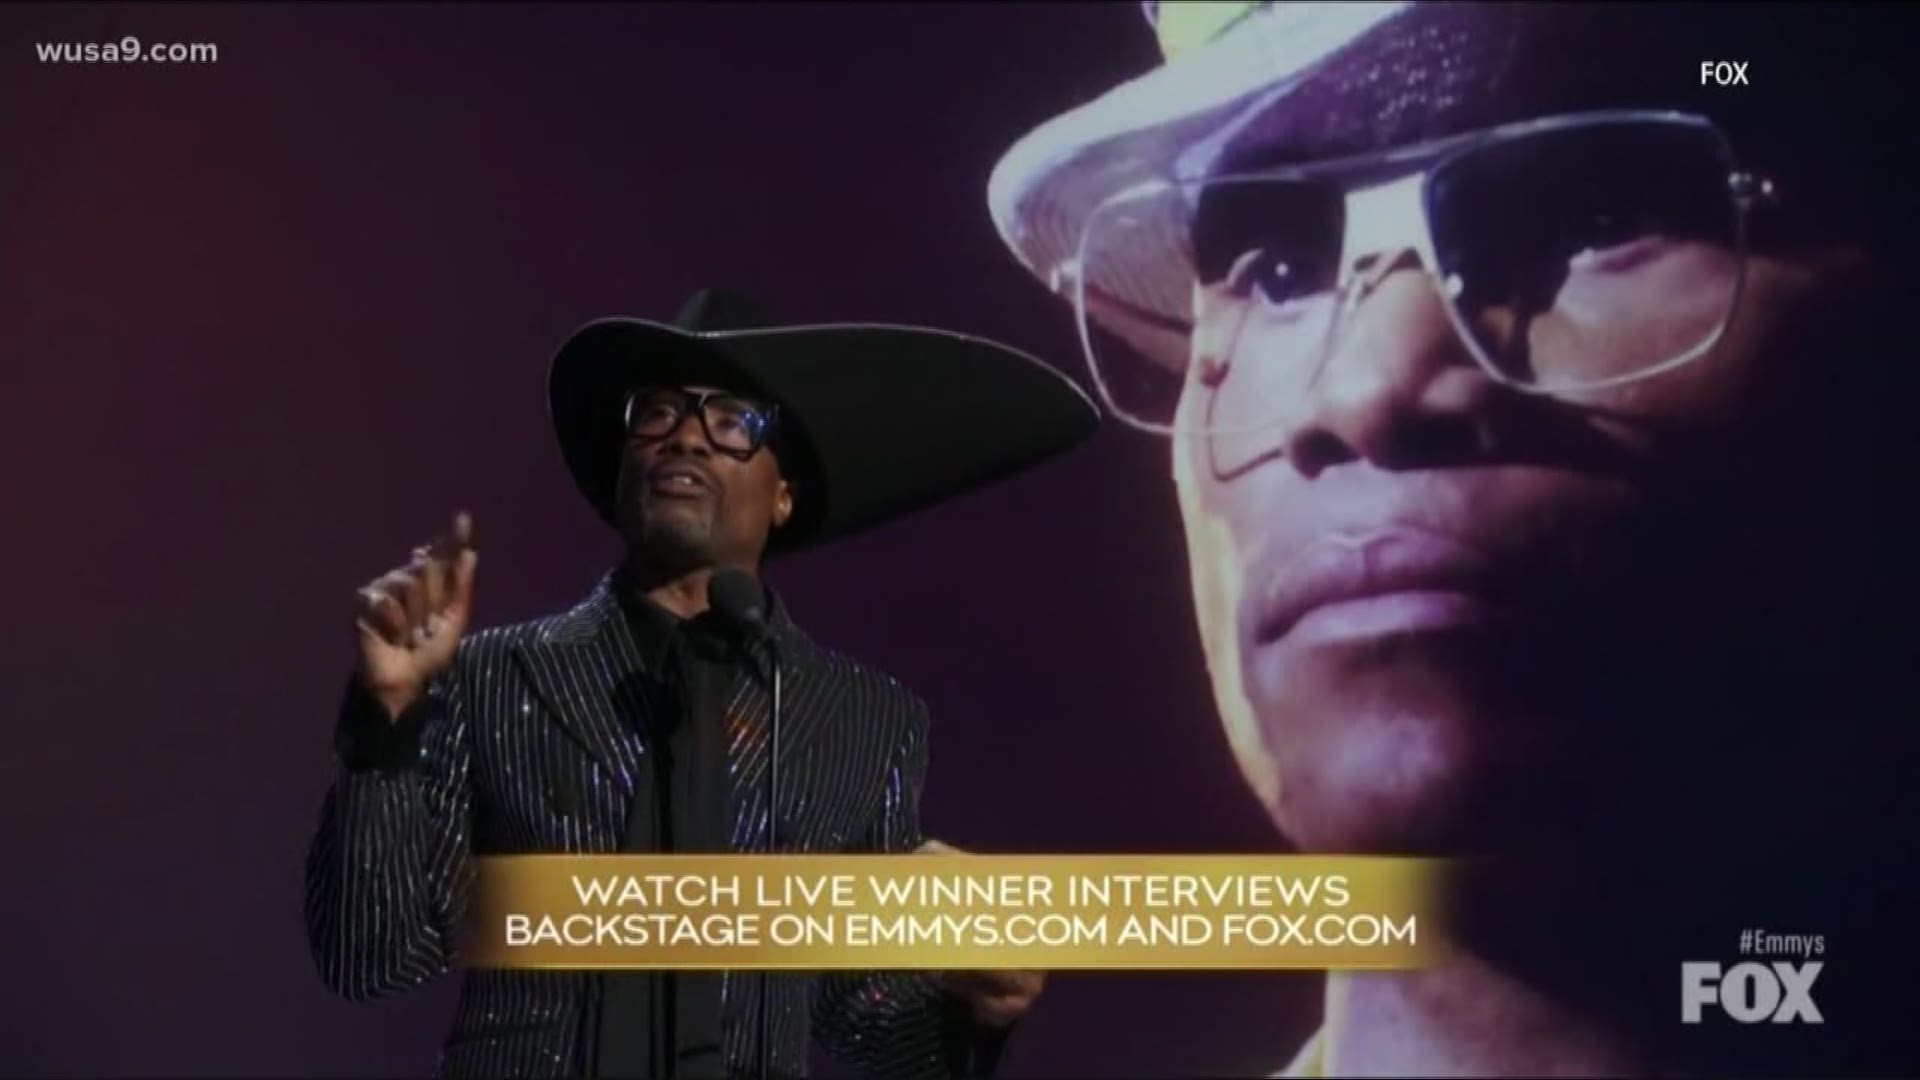 Billy Porter made history at the Emmys by becoming the first openly gay black man to win the lead actor in a drama series award.